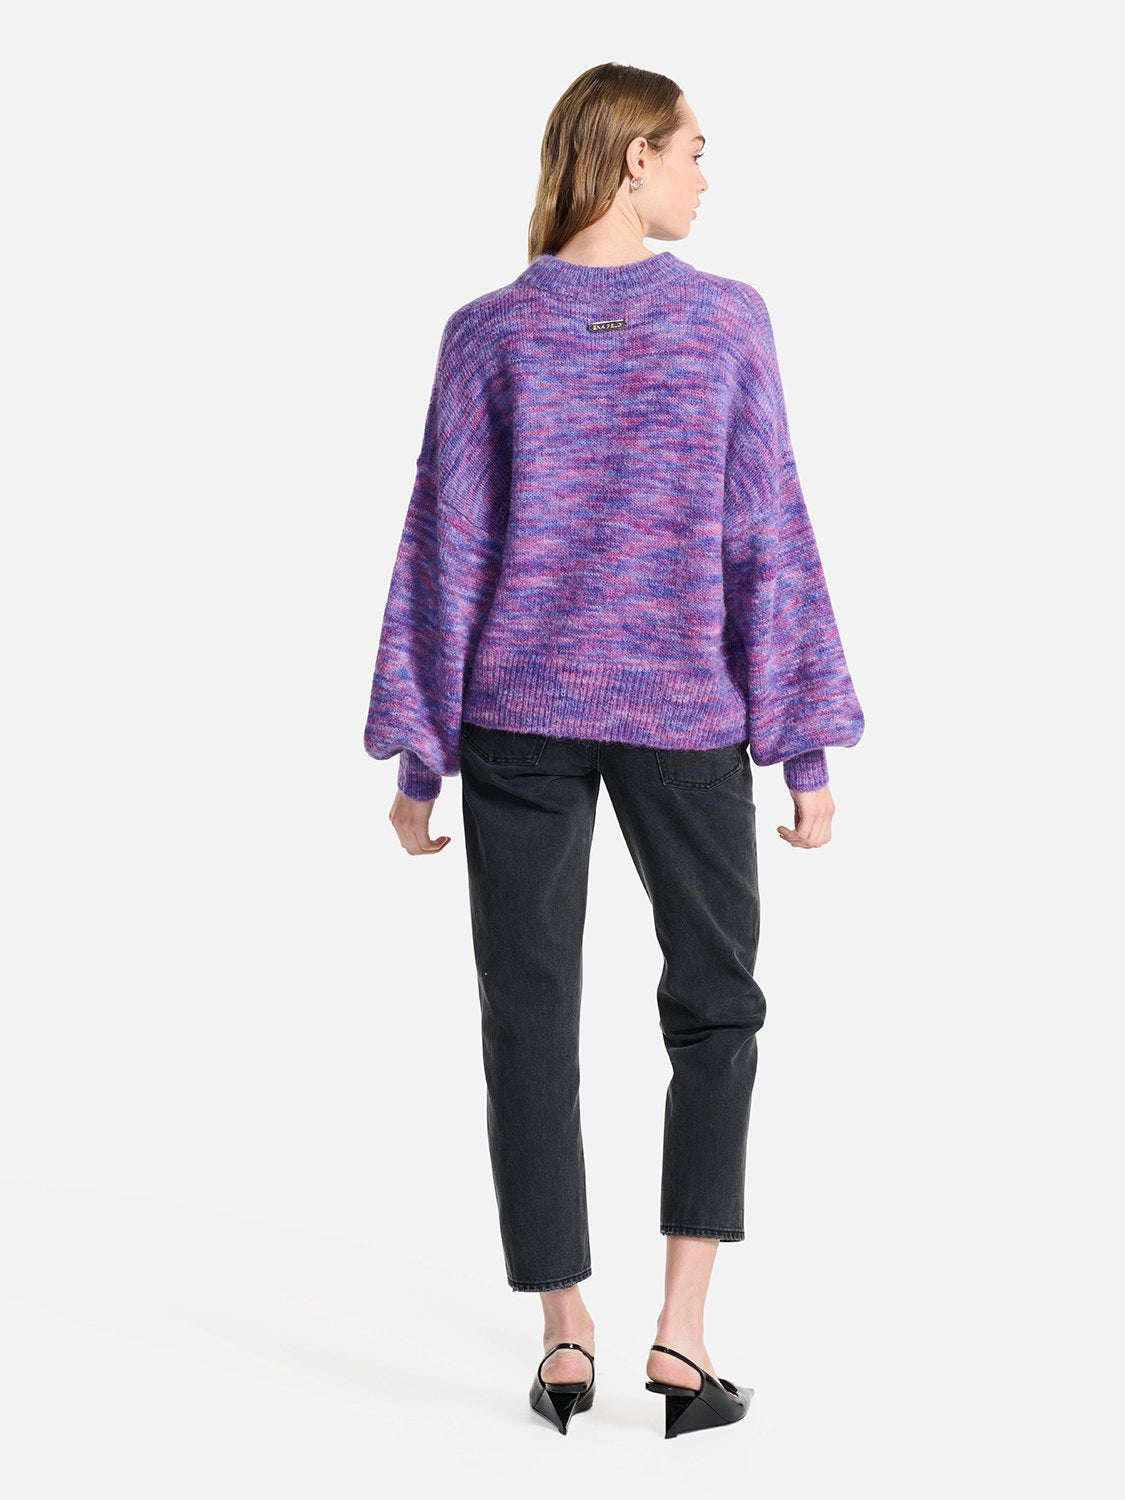 Jessica Knit Top - Meadow Violet Marle